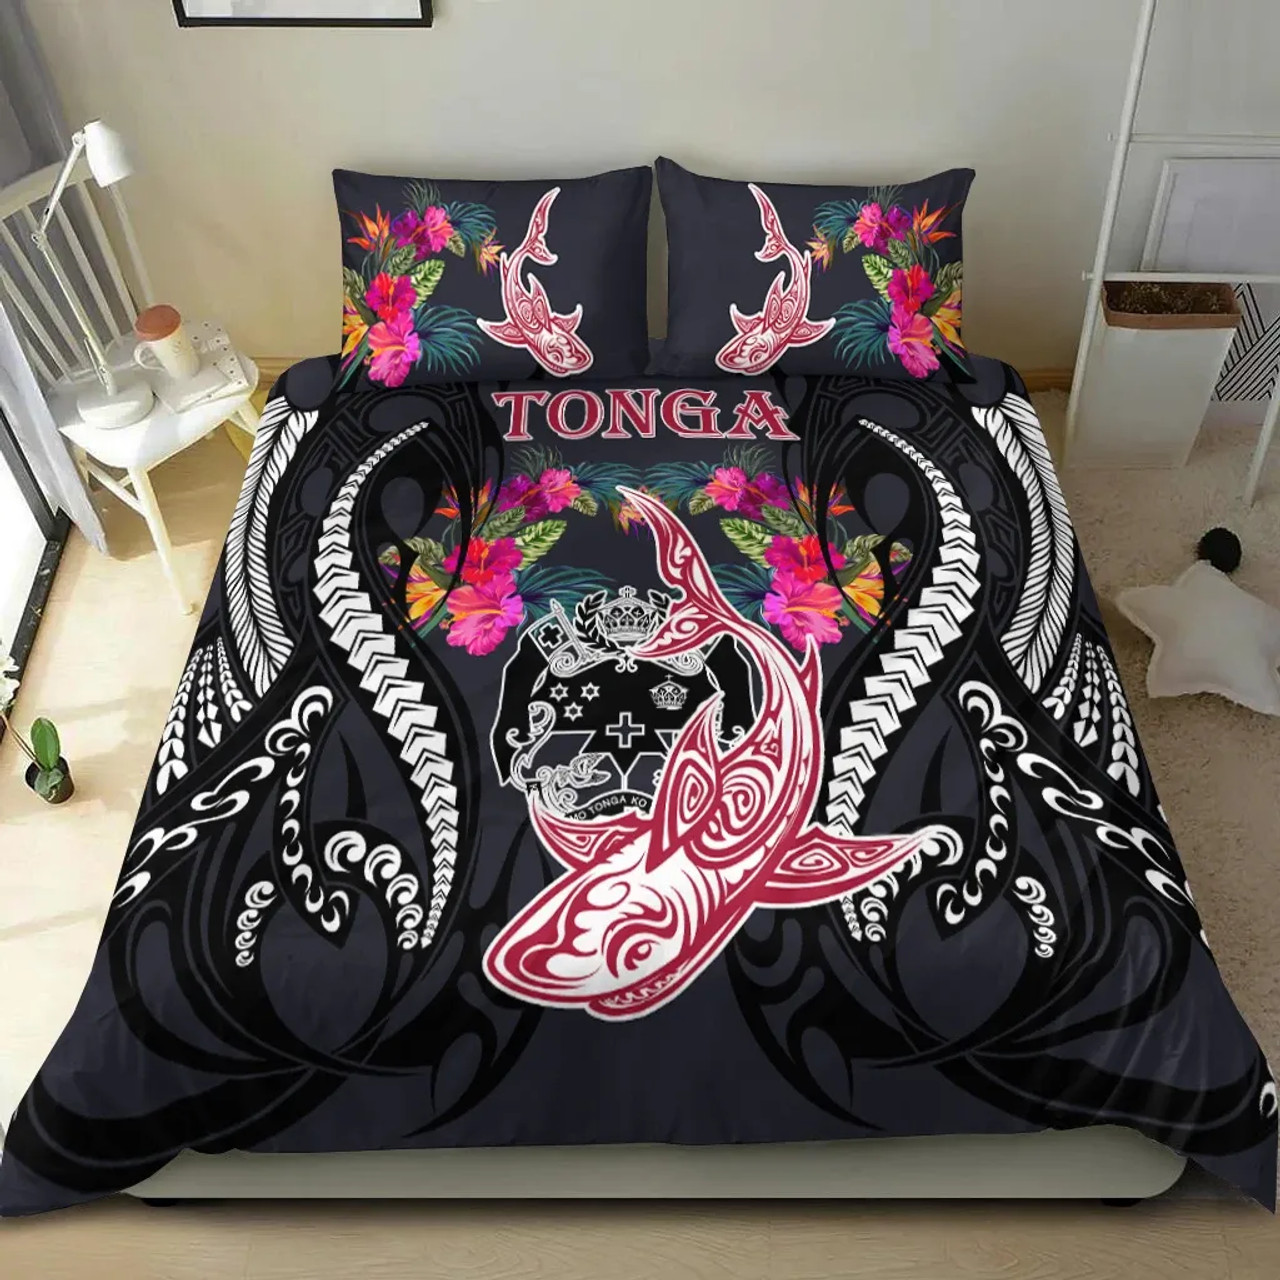 Papua New Guinea Personalised Bedding Set - Flag With Polynesian Patterns (Black) 6